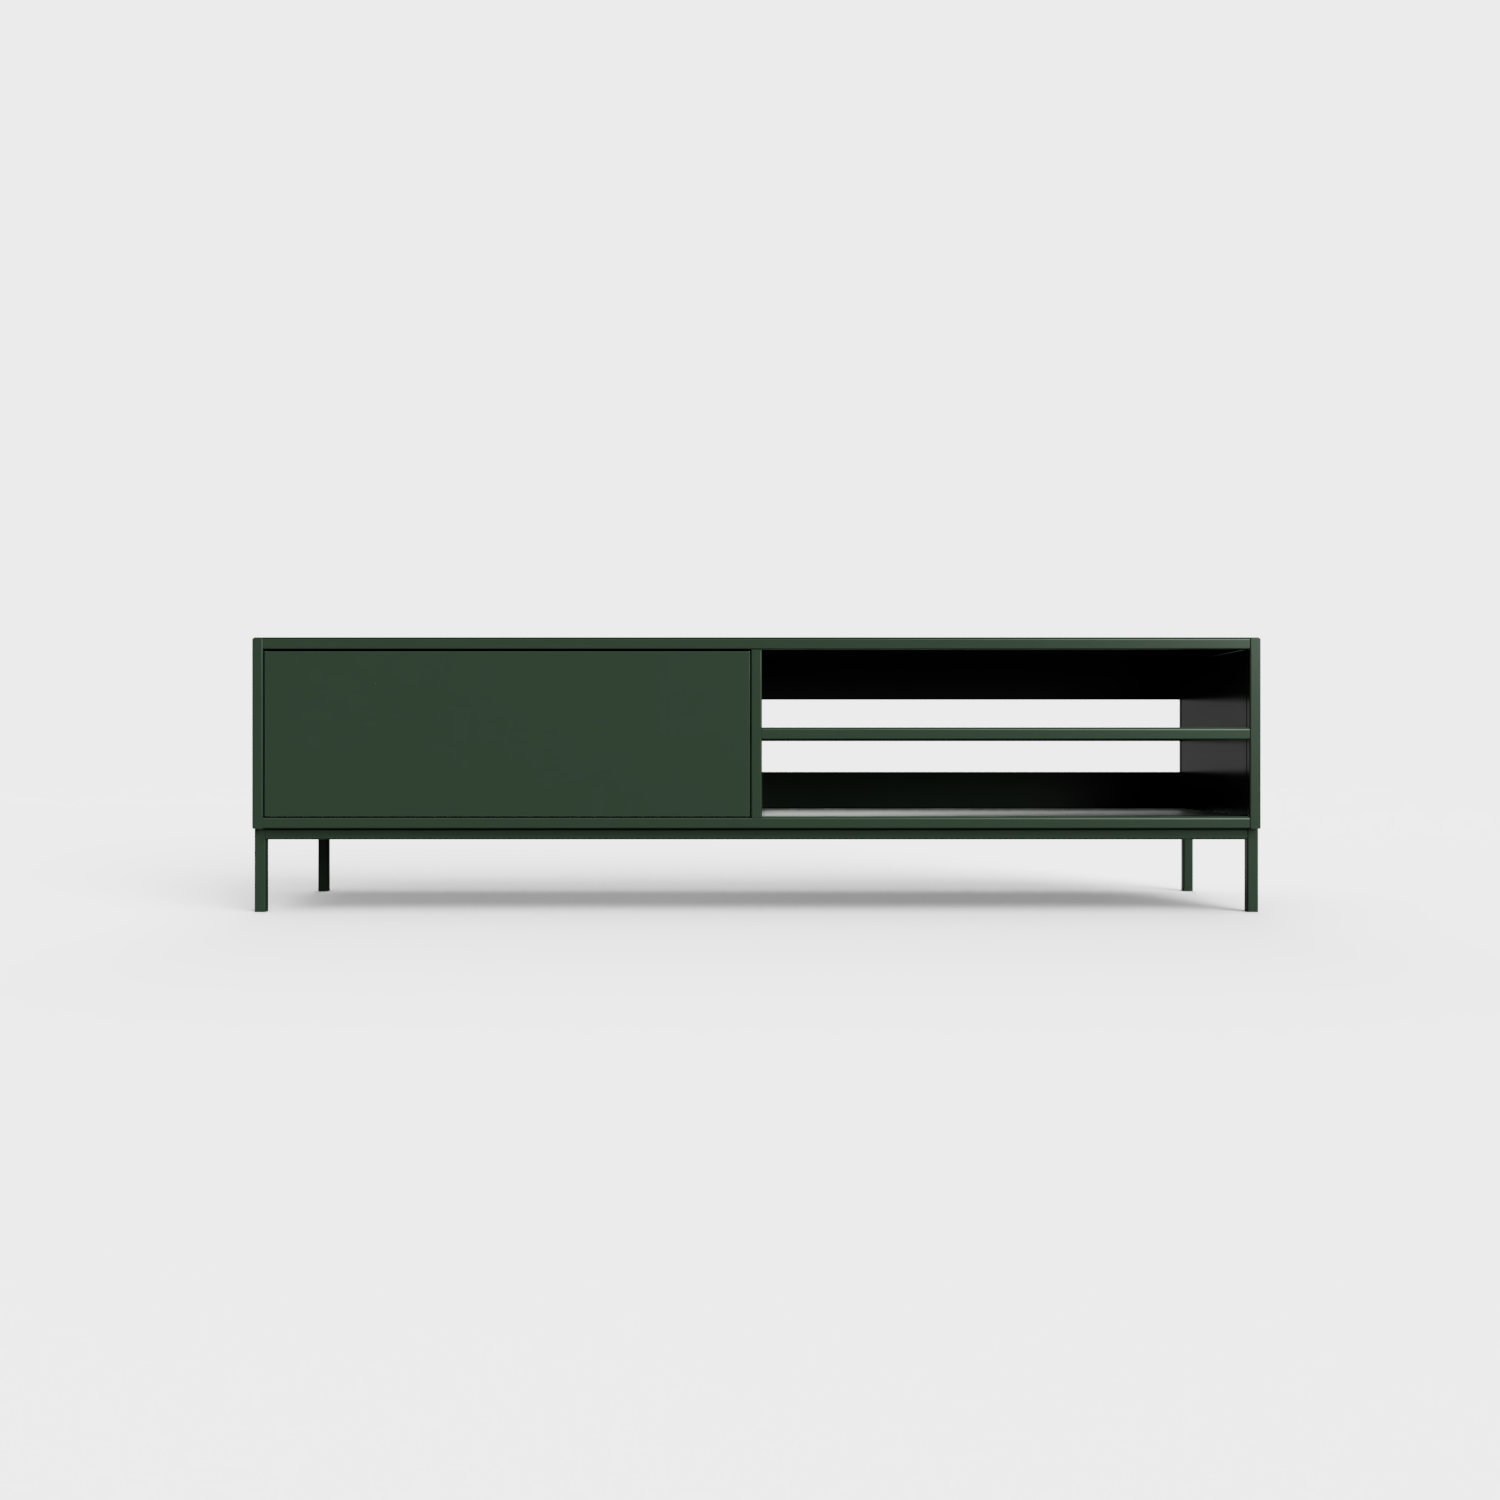 Prunus 02 Lowboard in Bottle Green color, powder-coated steel, elegant and modern piece of furniture for your living room